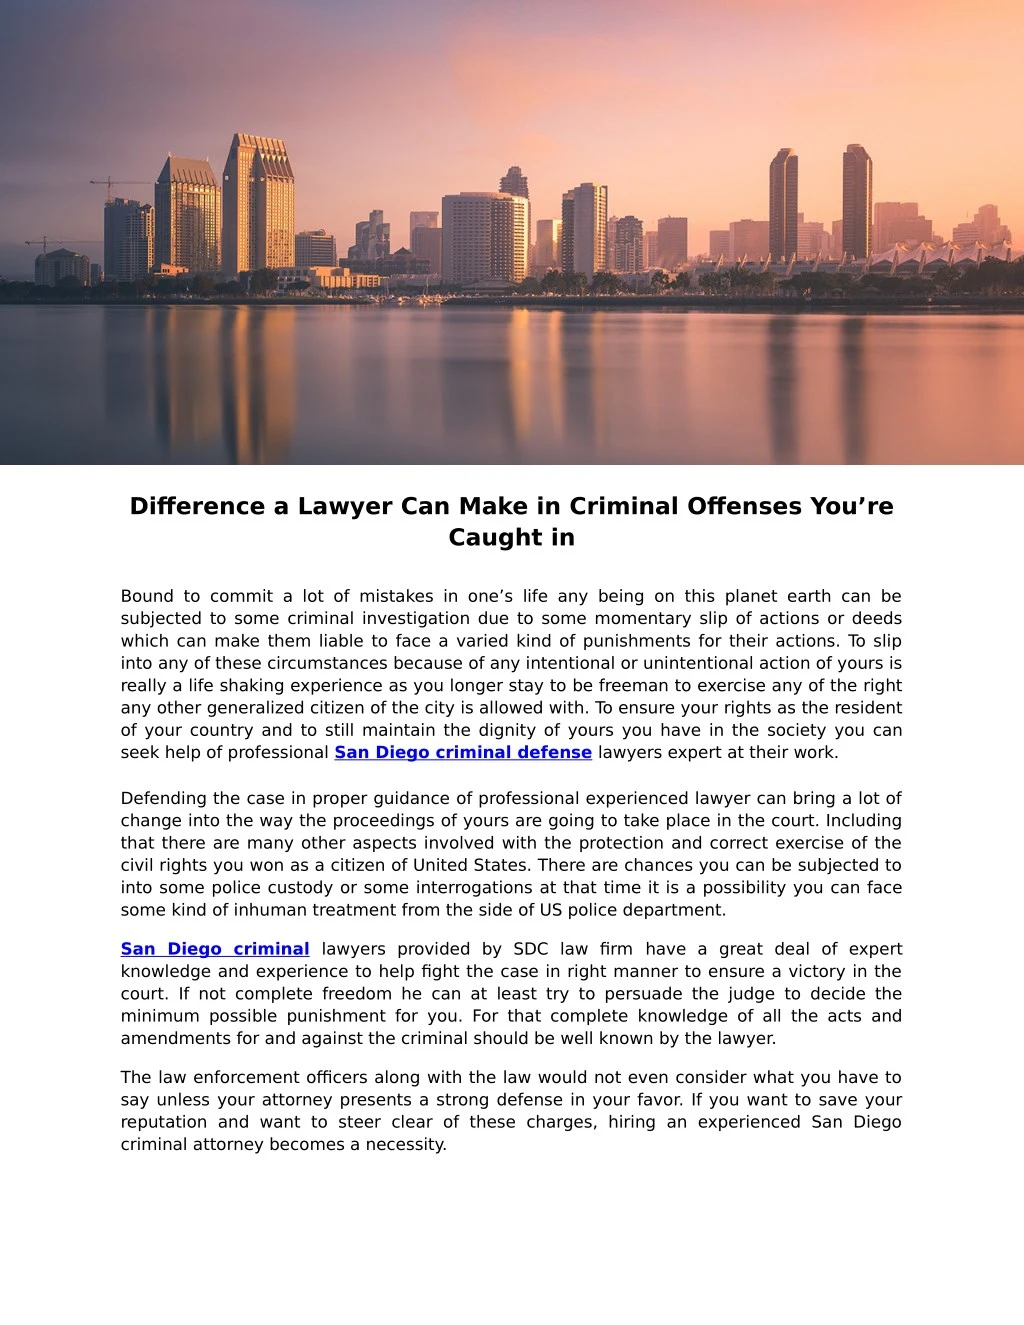 difference a lawyer can make in criminal offenses